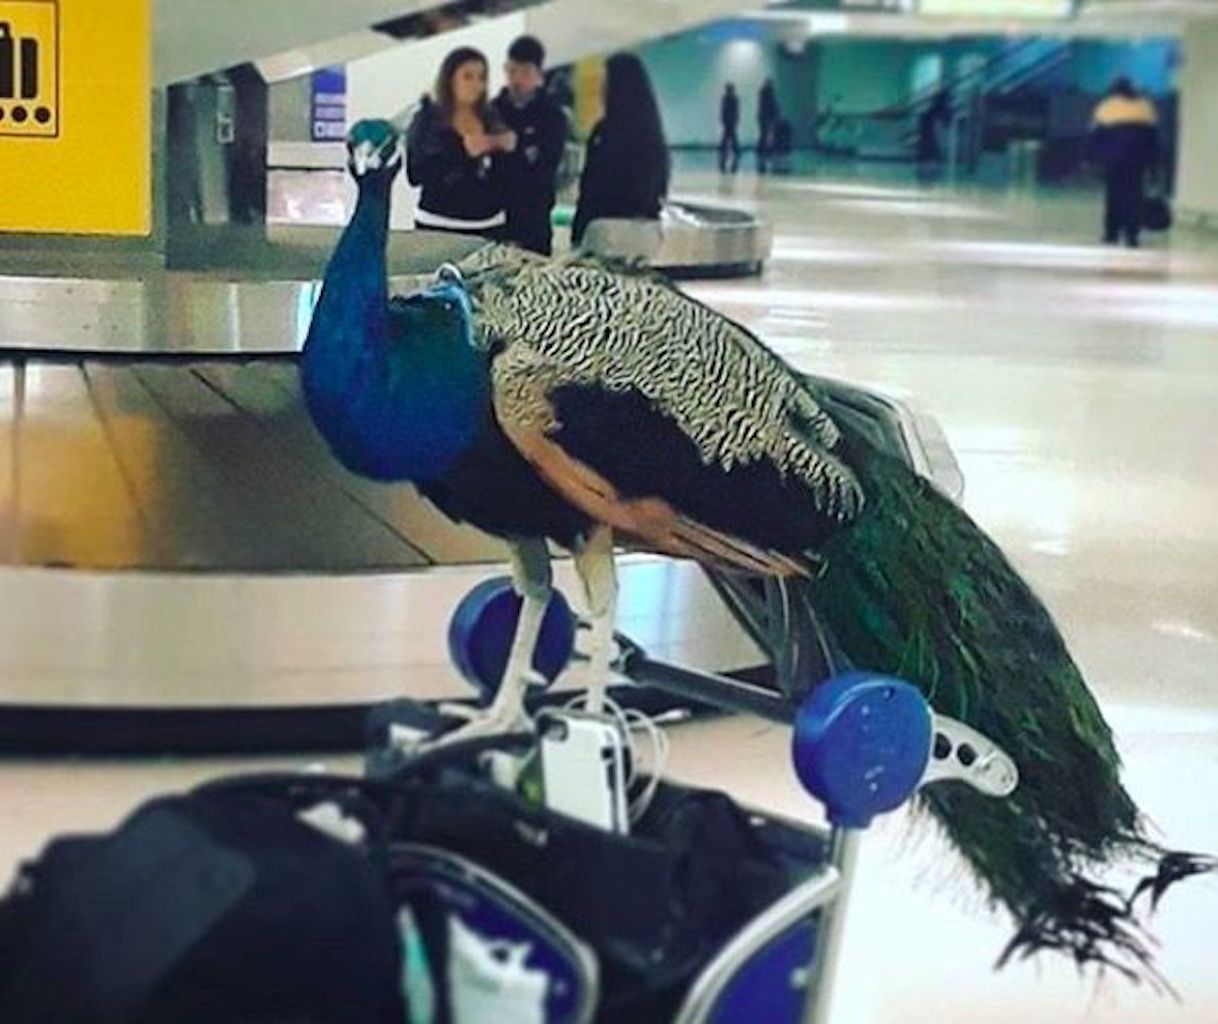 peacock at the airport